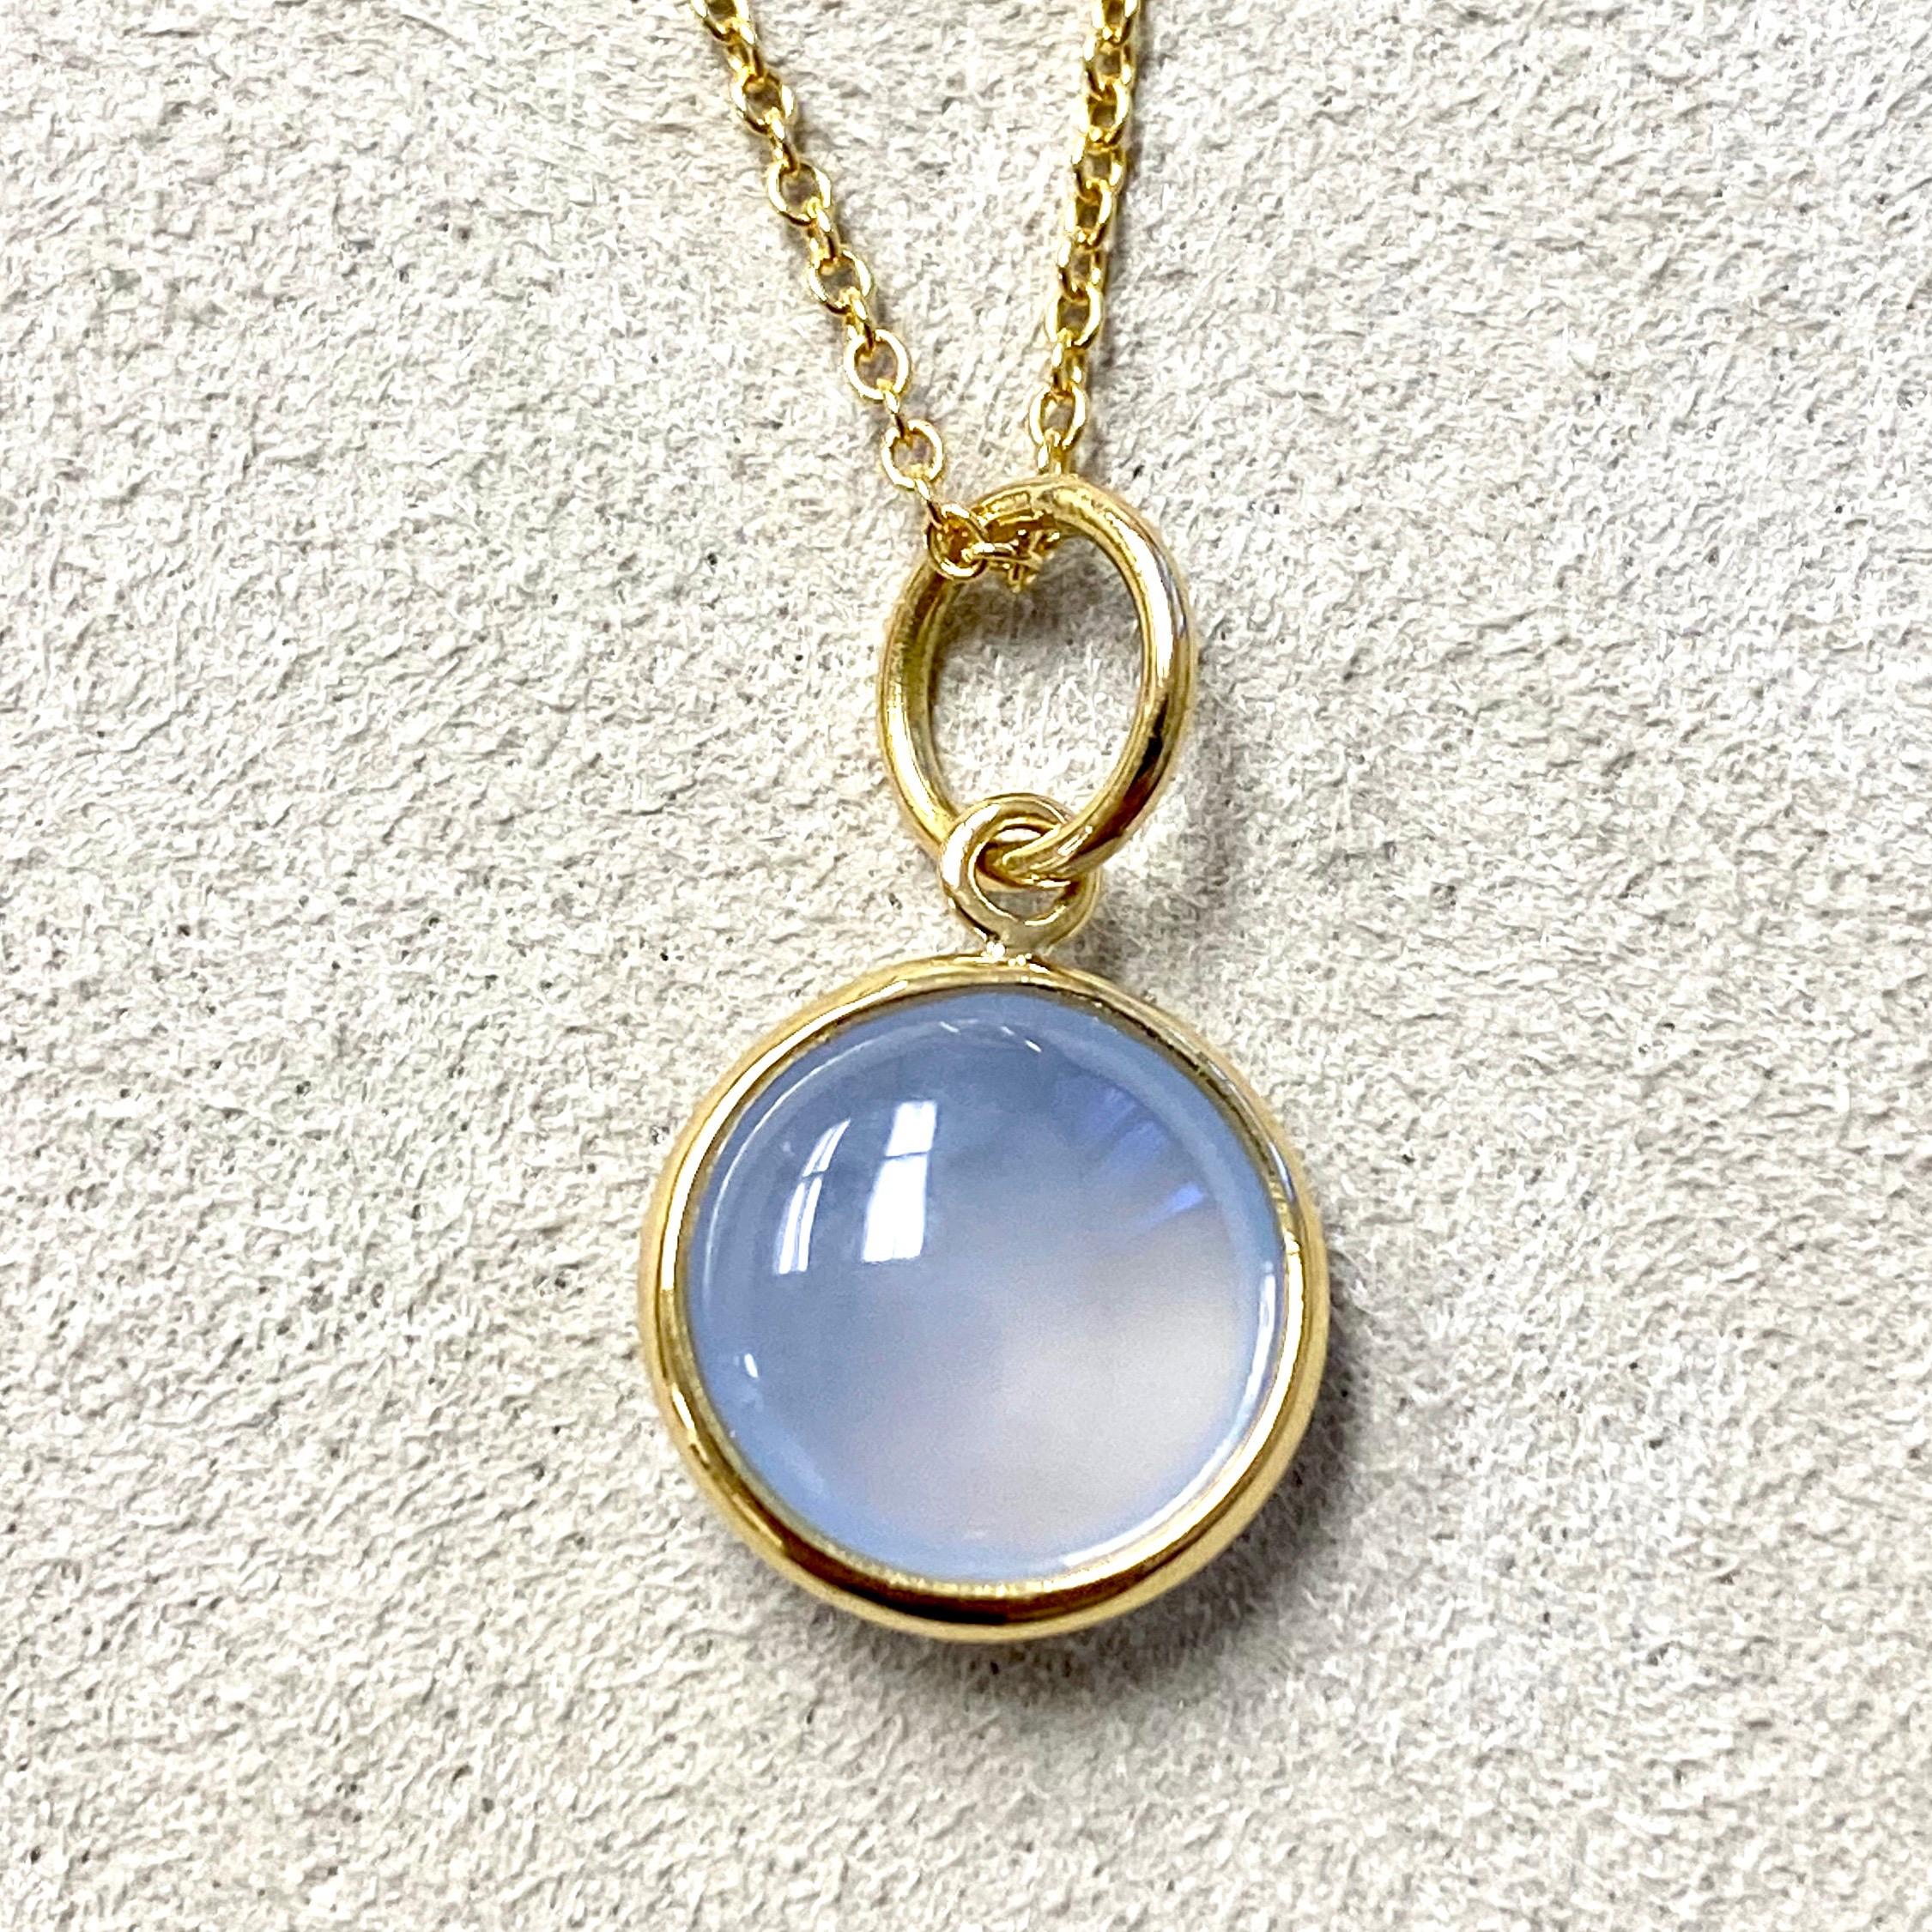 Created in 18 karat yellow gold
10 mm size charm
Blue Chalcedony 3.5 cts approx
Chain sold separately 


About the Designers ~ Dharmesh & Namrata

Drawing inspiration from little things, Dharmesh & Namrata Kothari have created an extraordinary and